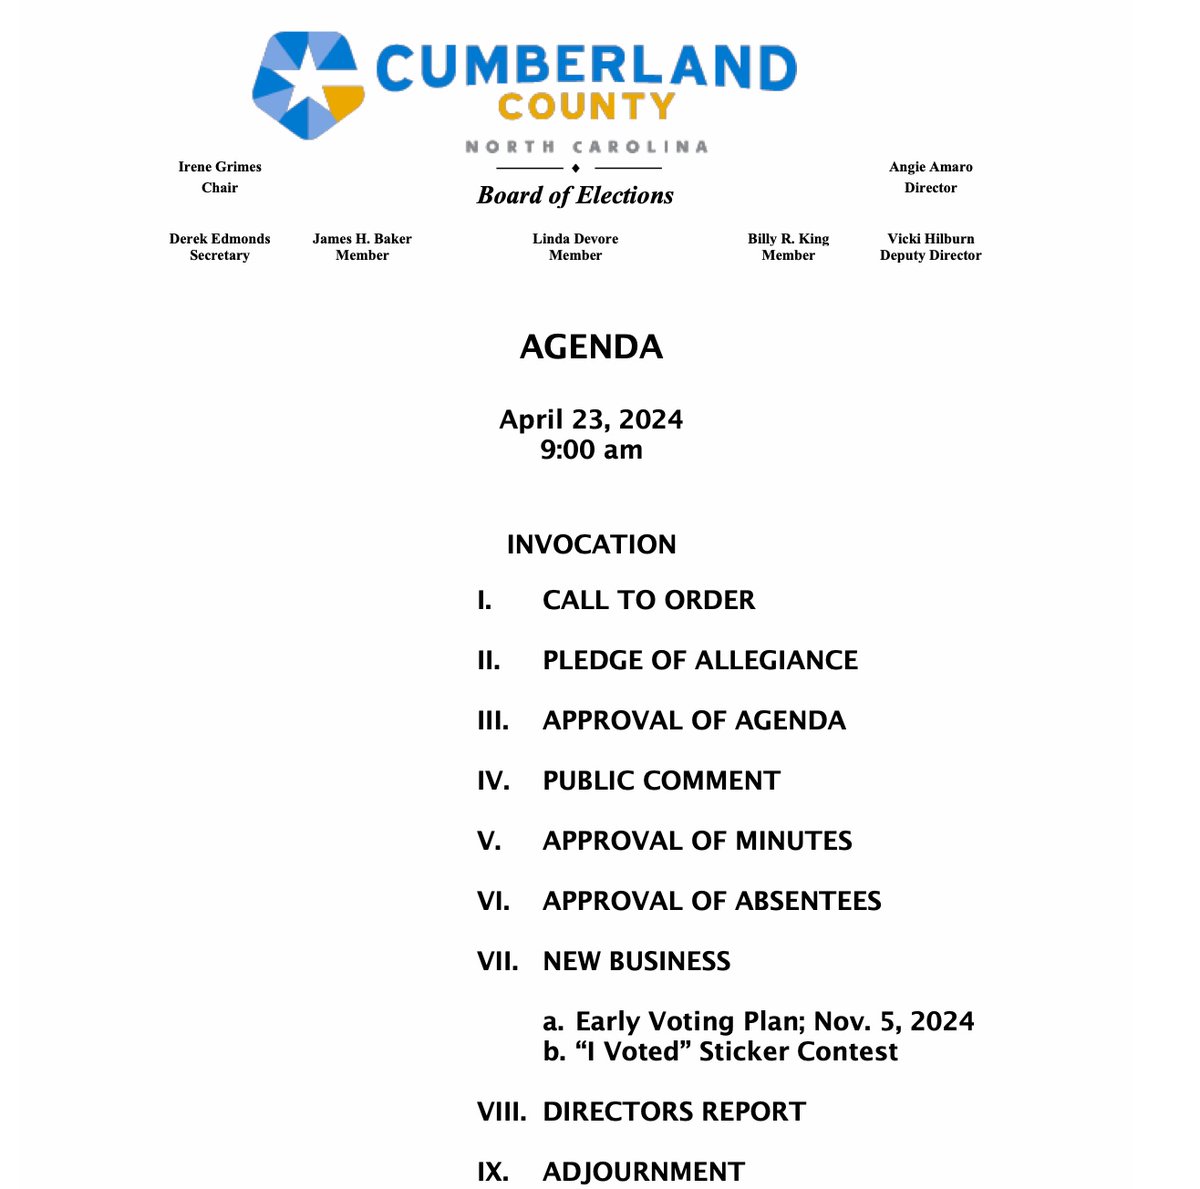 The #CumberlandCountyBoardofElections will hold an #Absenteemeeting on 4/23/24,9a.
#EARLYVOTINGPLAN for the November 2024 Presidential Election will be discussed.#publiccomment period was added to the agenda.This item has been added to this agenda (which is unusual), because the